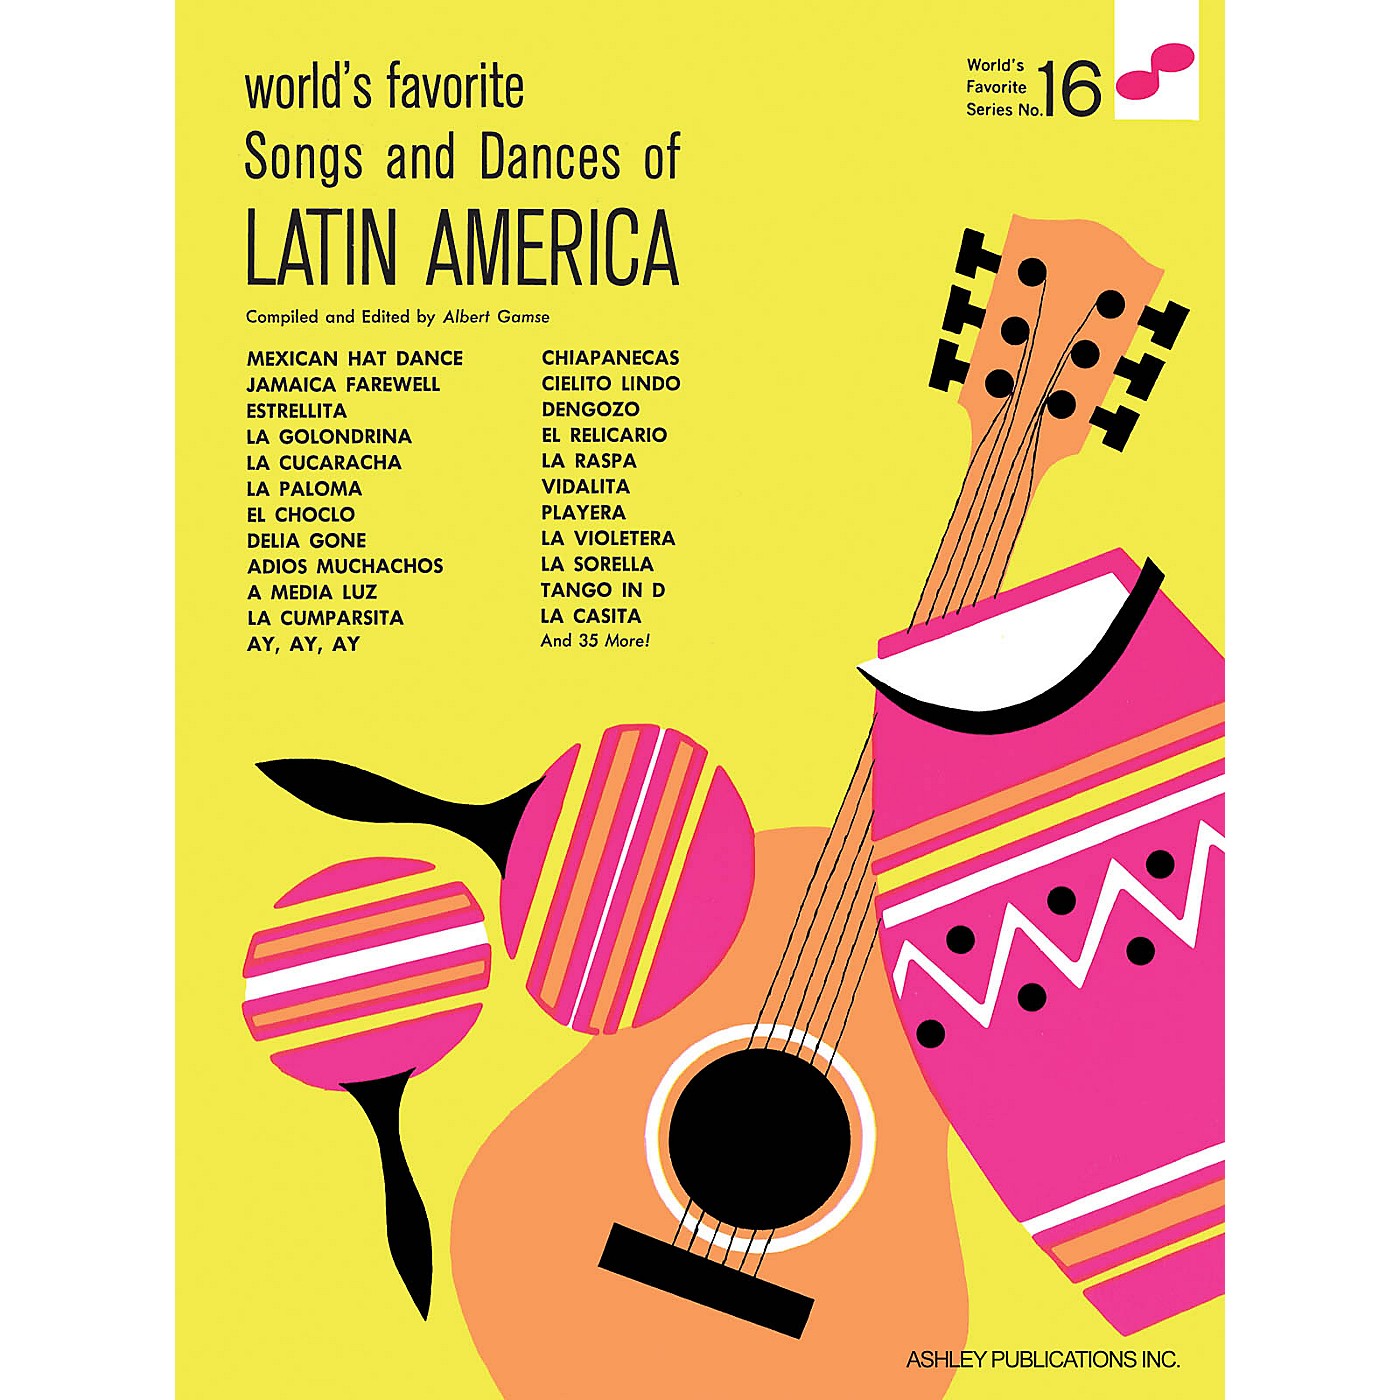 Ashley Publications Inc. Songs and Dances of Latin America World's Favorite (Ashley) Series thumbnail